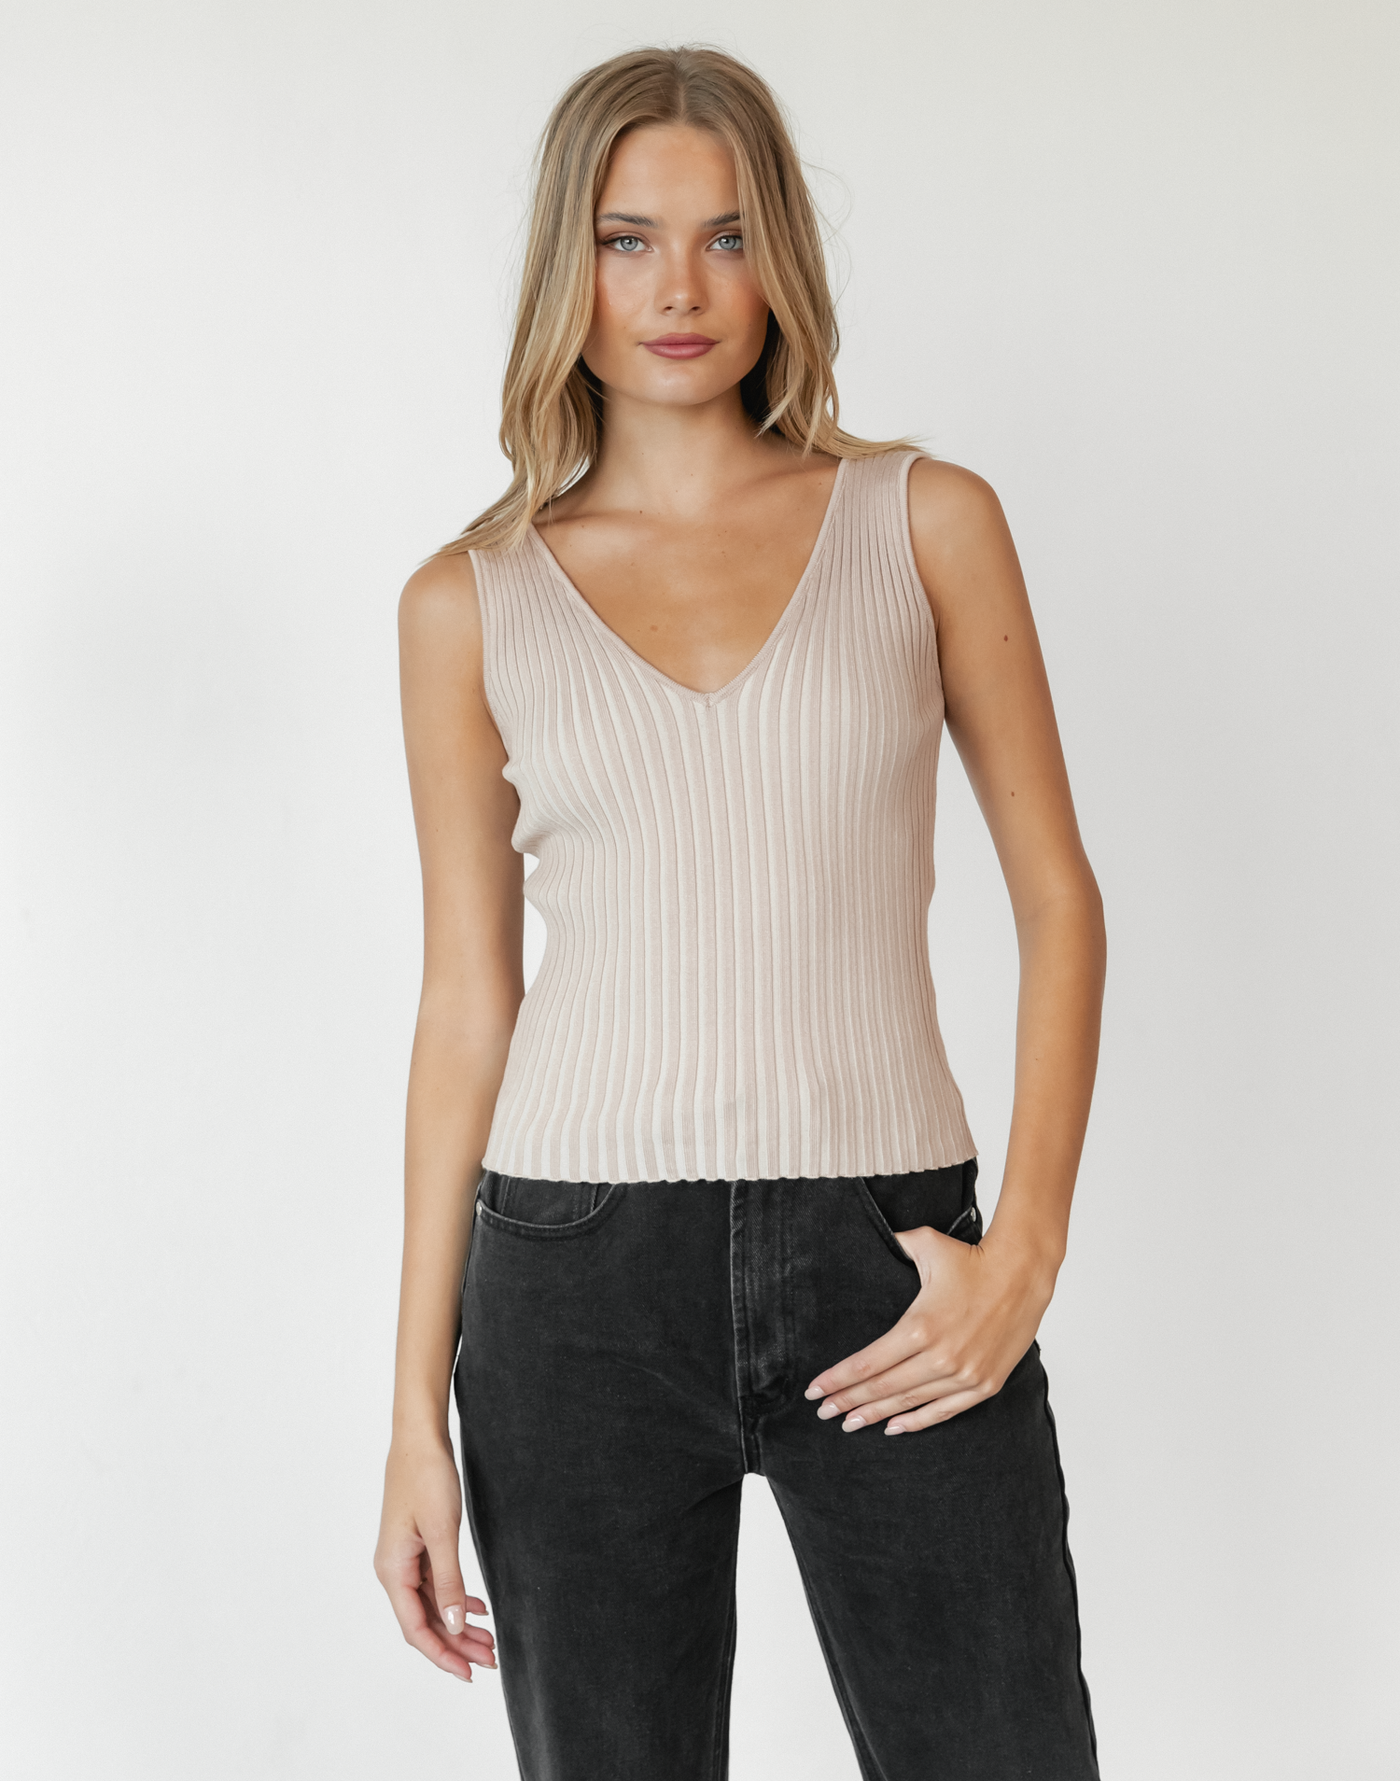 Carmaine Knit Top (Beige) - Ribbed Knit Top - Women's Top - Charcoal Clothing